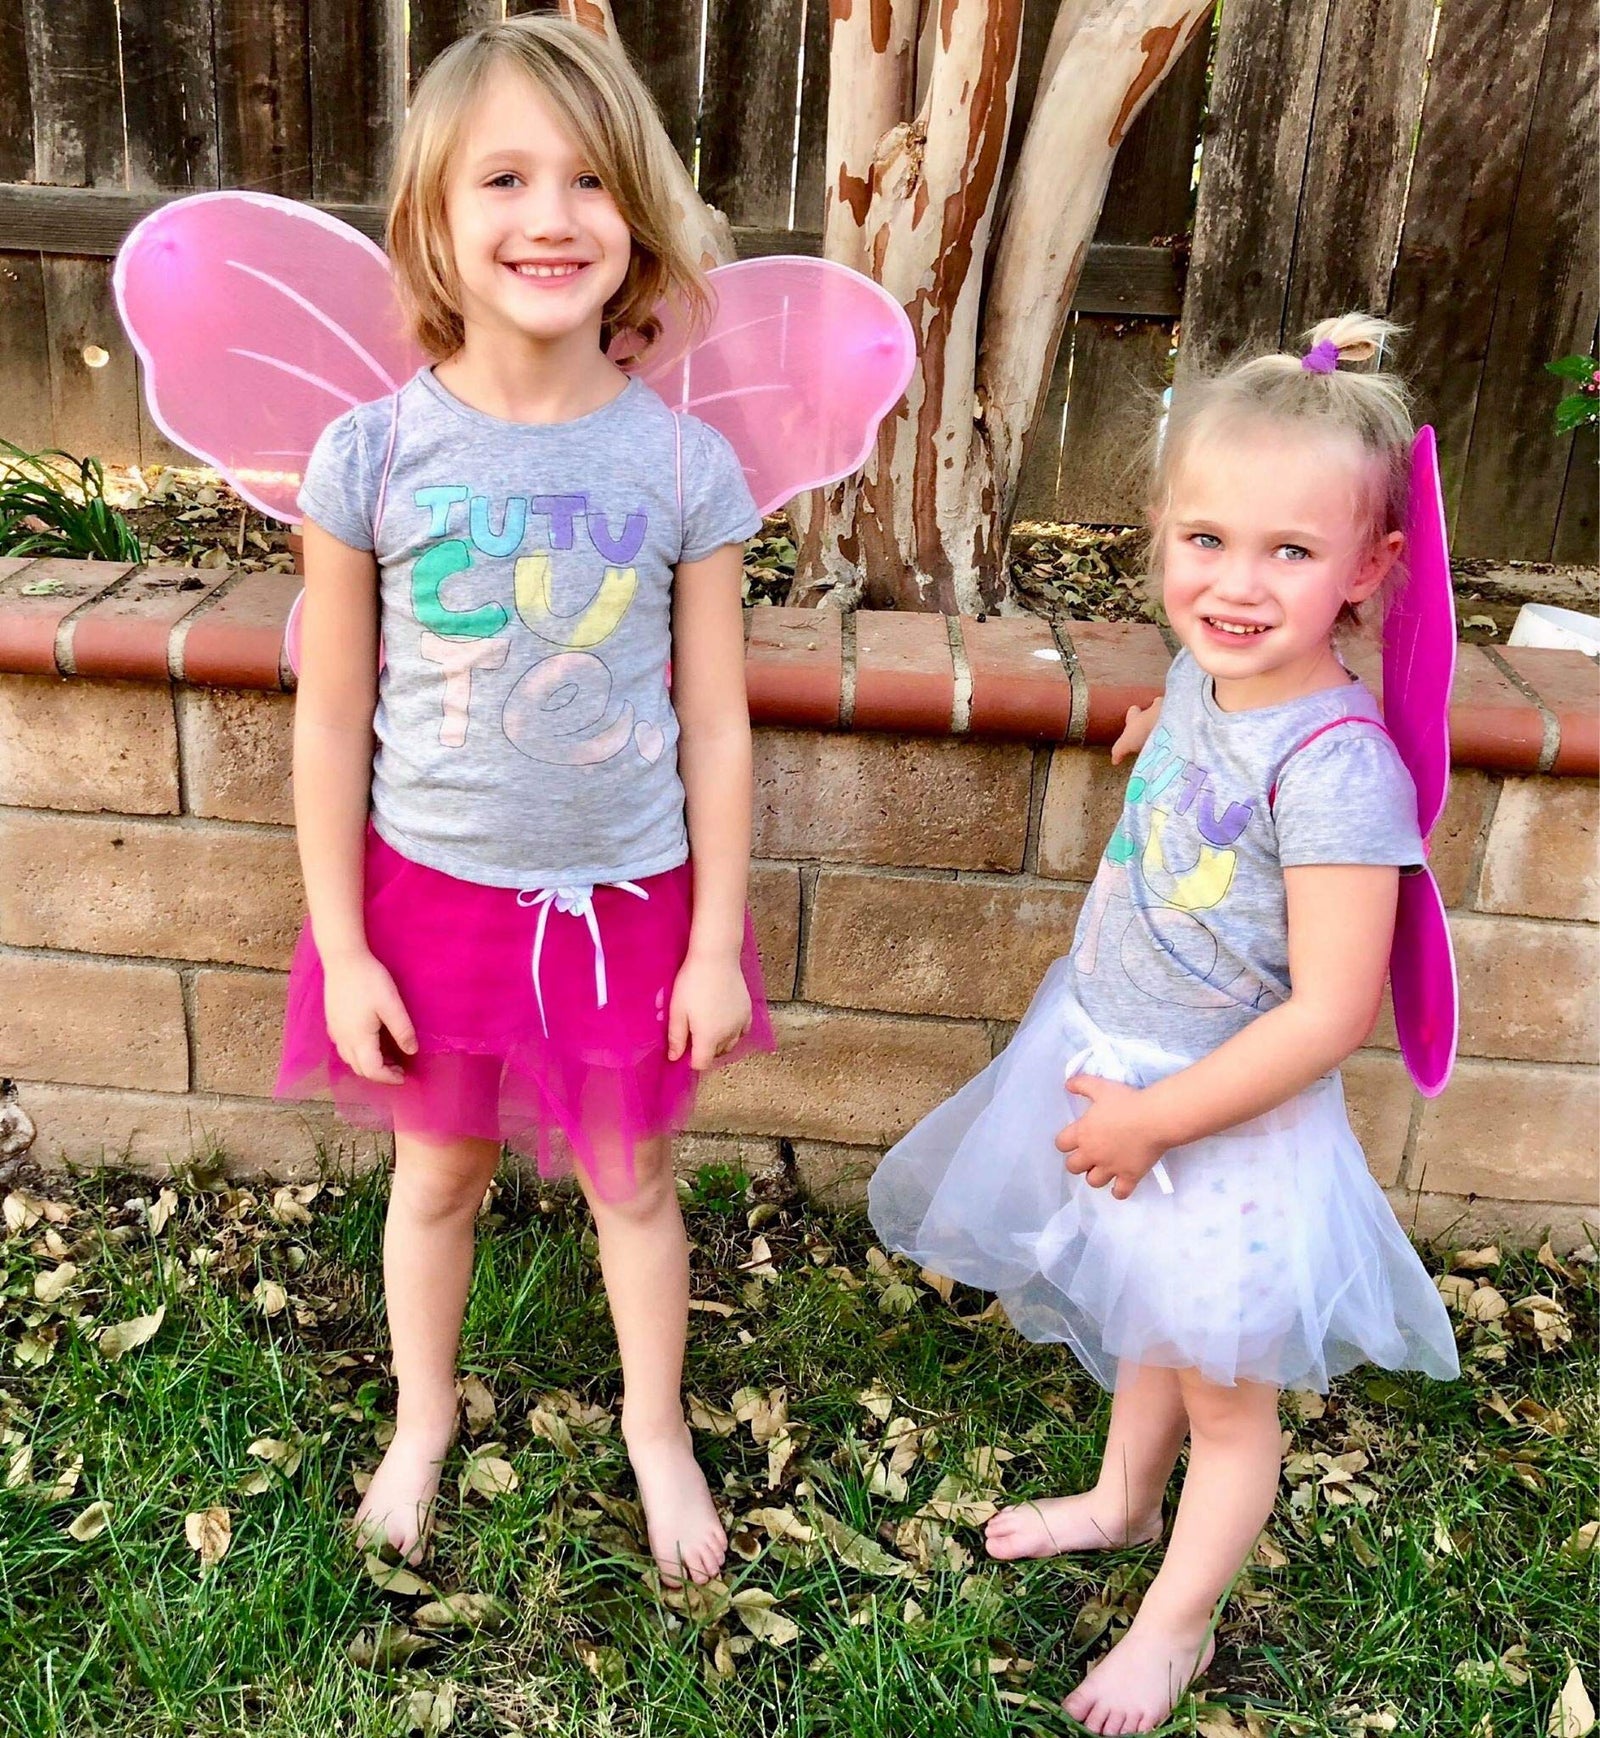 Girls Fairy Wings fedio 5 Pack Princess Butterfly Costume Wings Set for Kids Dress up Birthday Party(Ages 3-6 Years) (Fairy wings(5Pack))